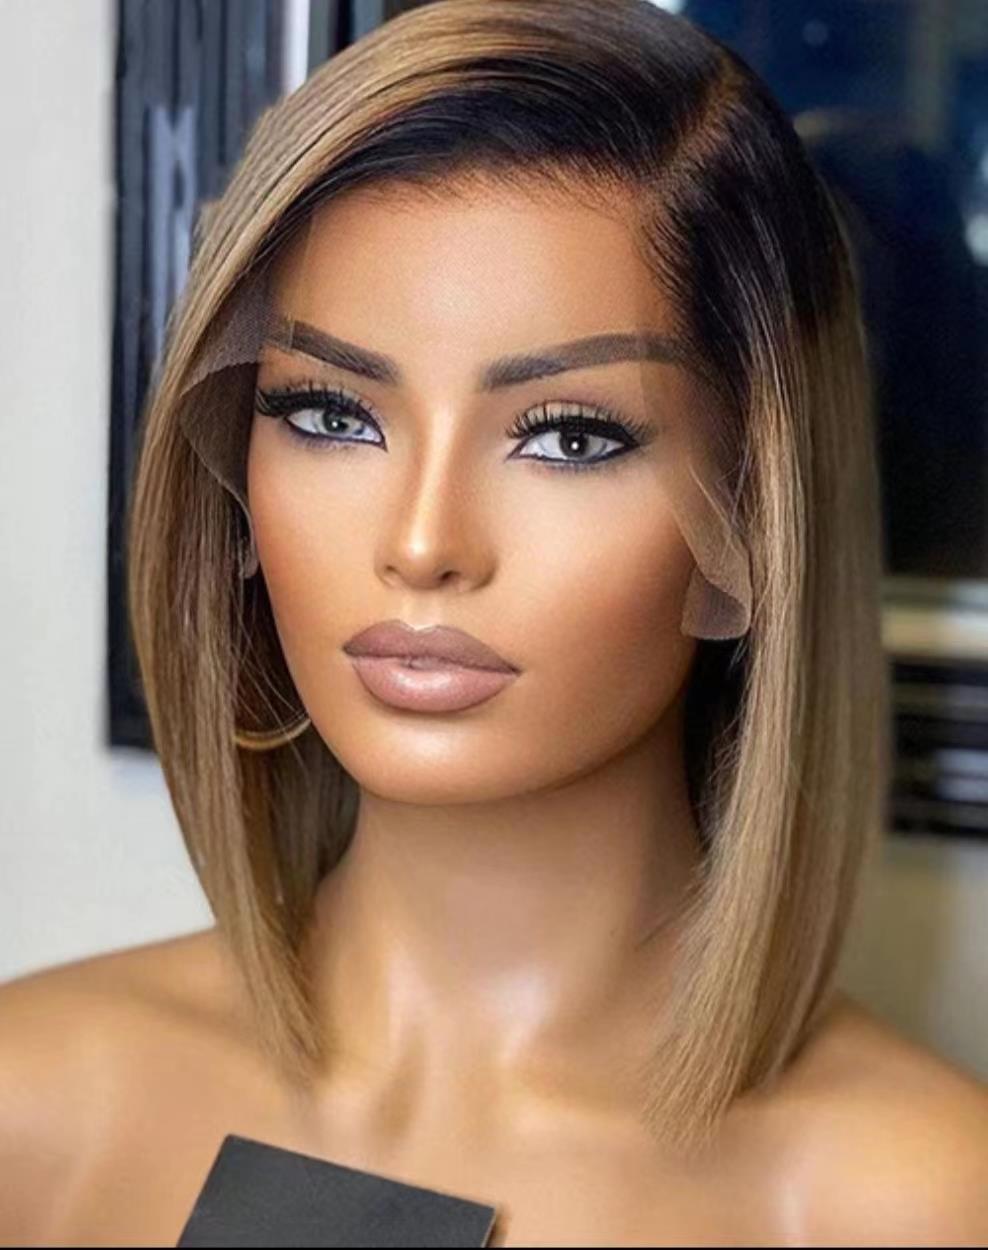 gluelless Human Hair Wig Ombre Ash Blonde Short Straight Cut 4x4 Lace Front Bob Wig